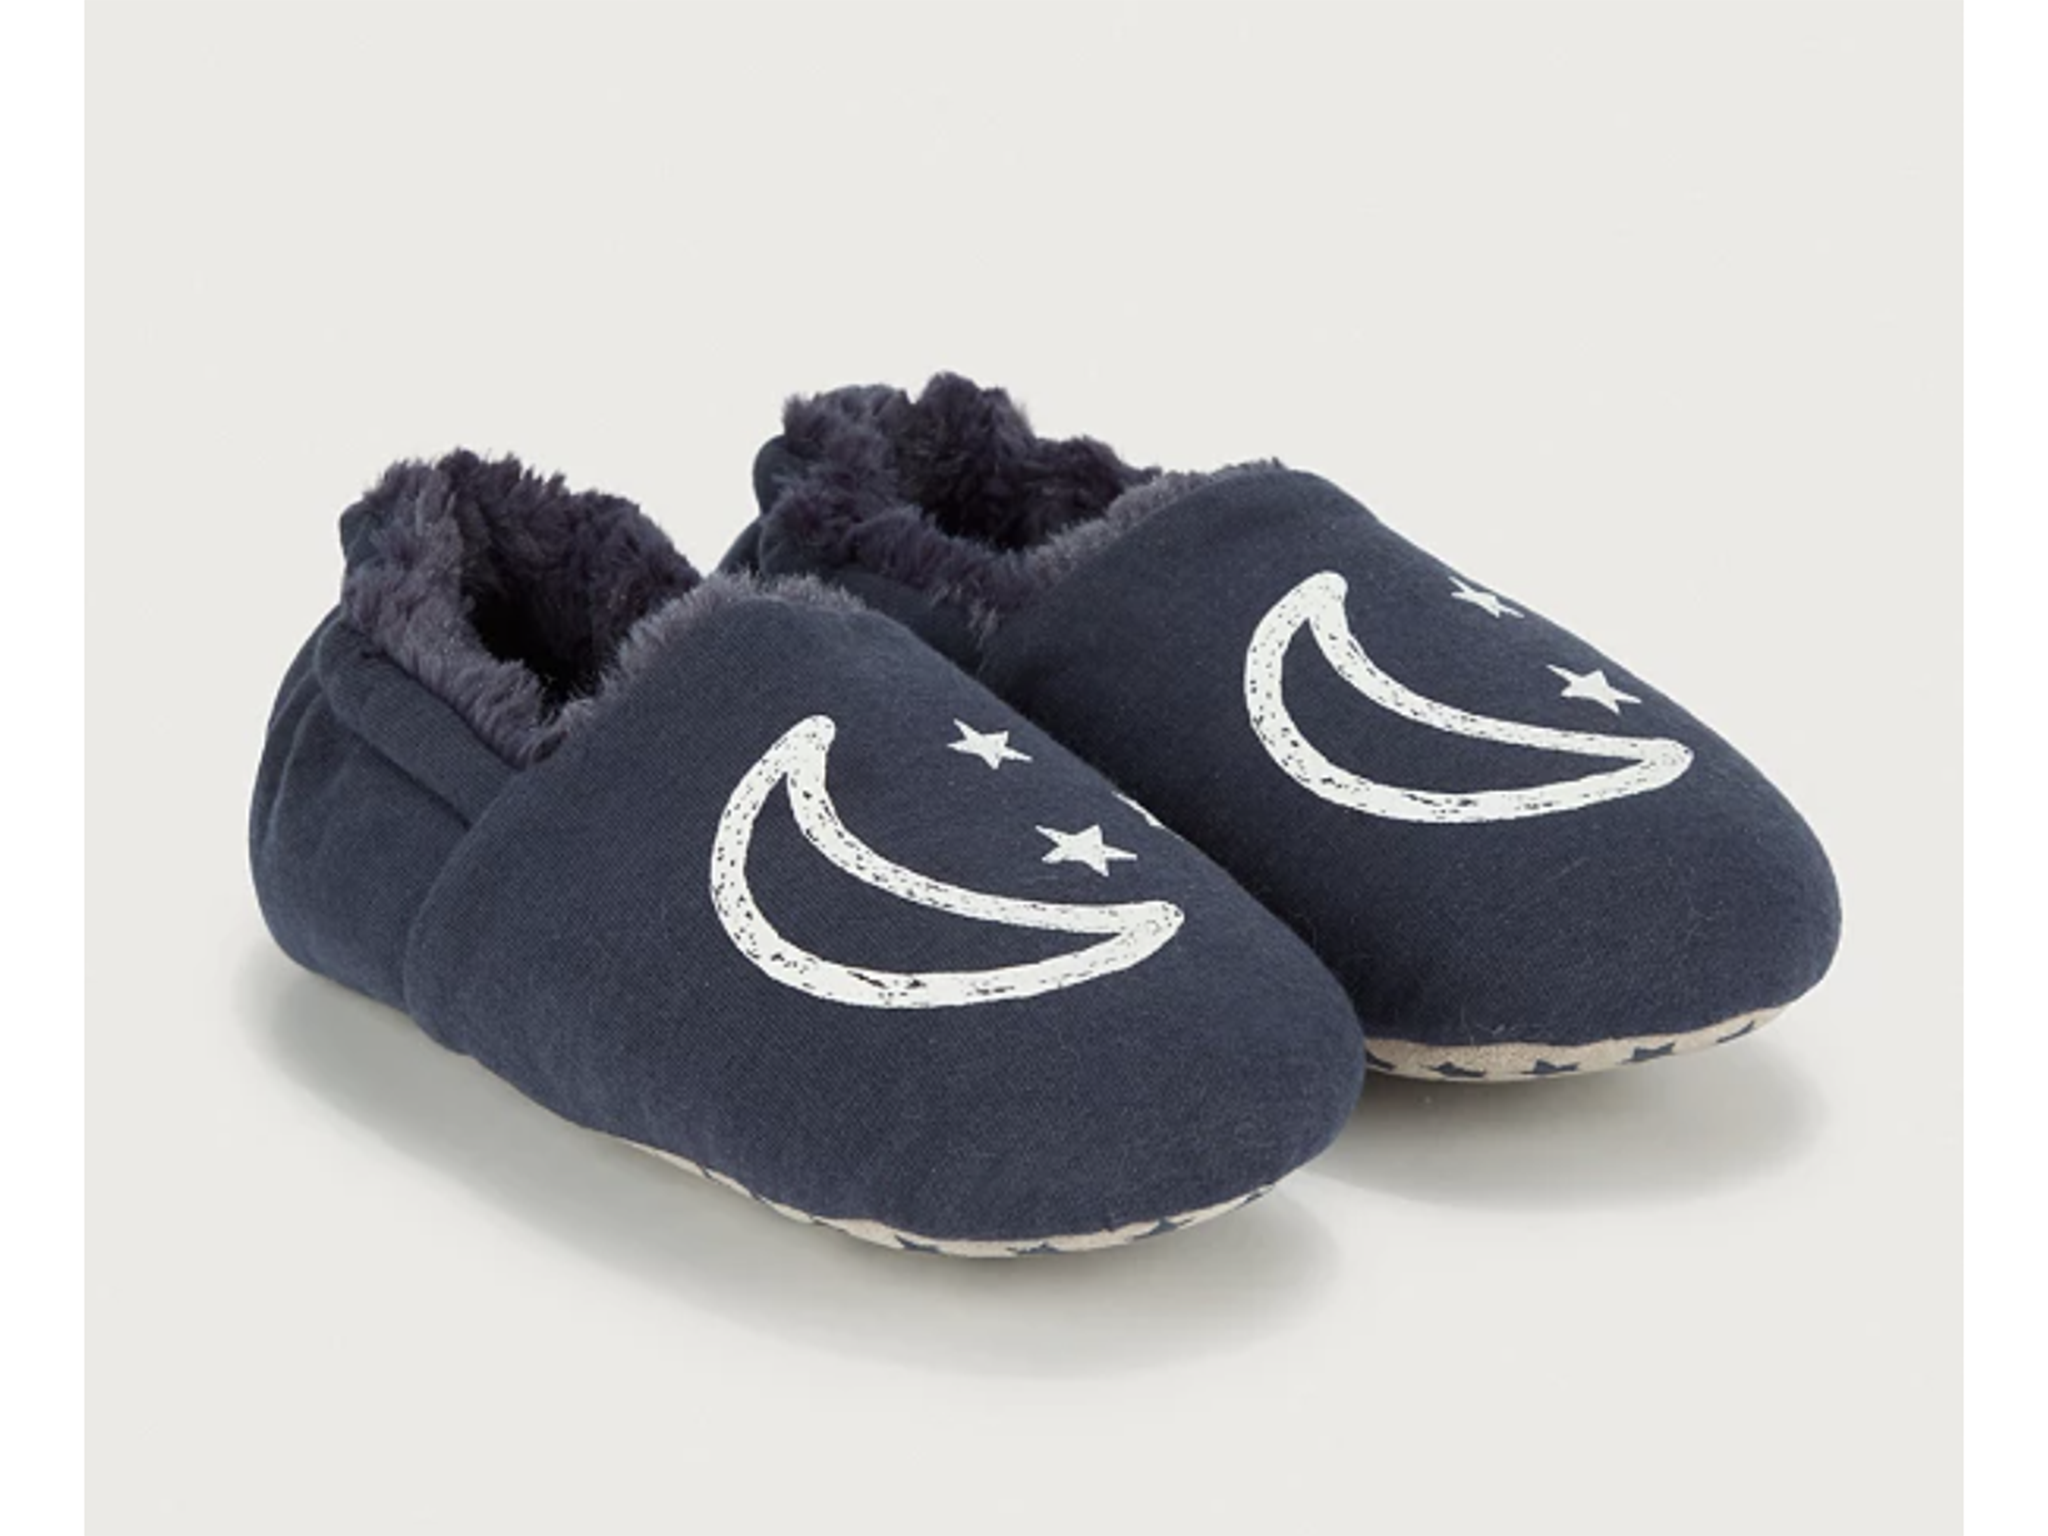 slippers for 10 year old boy